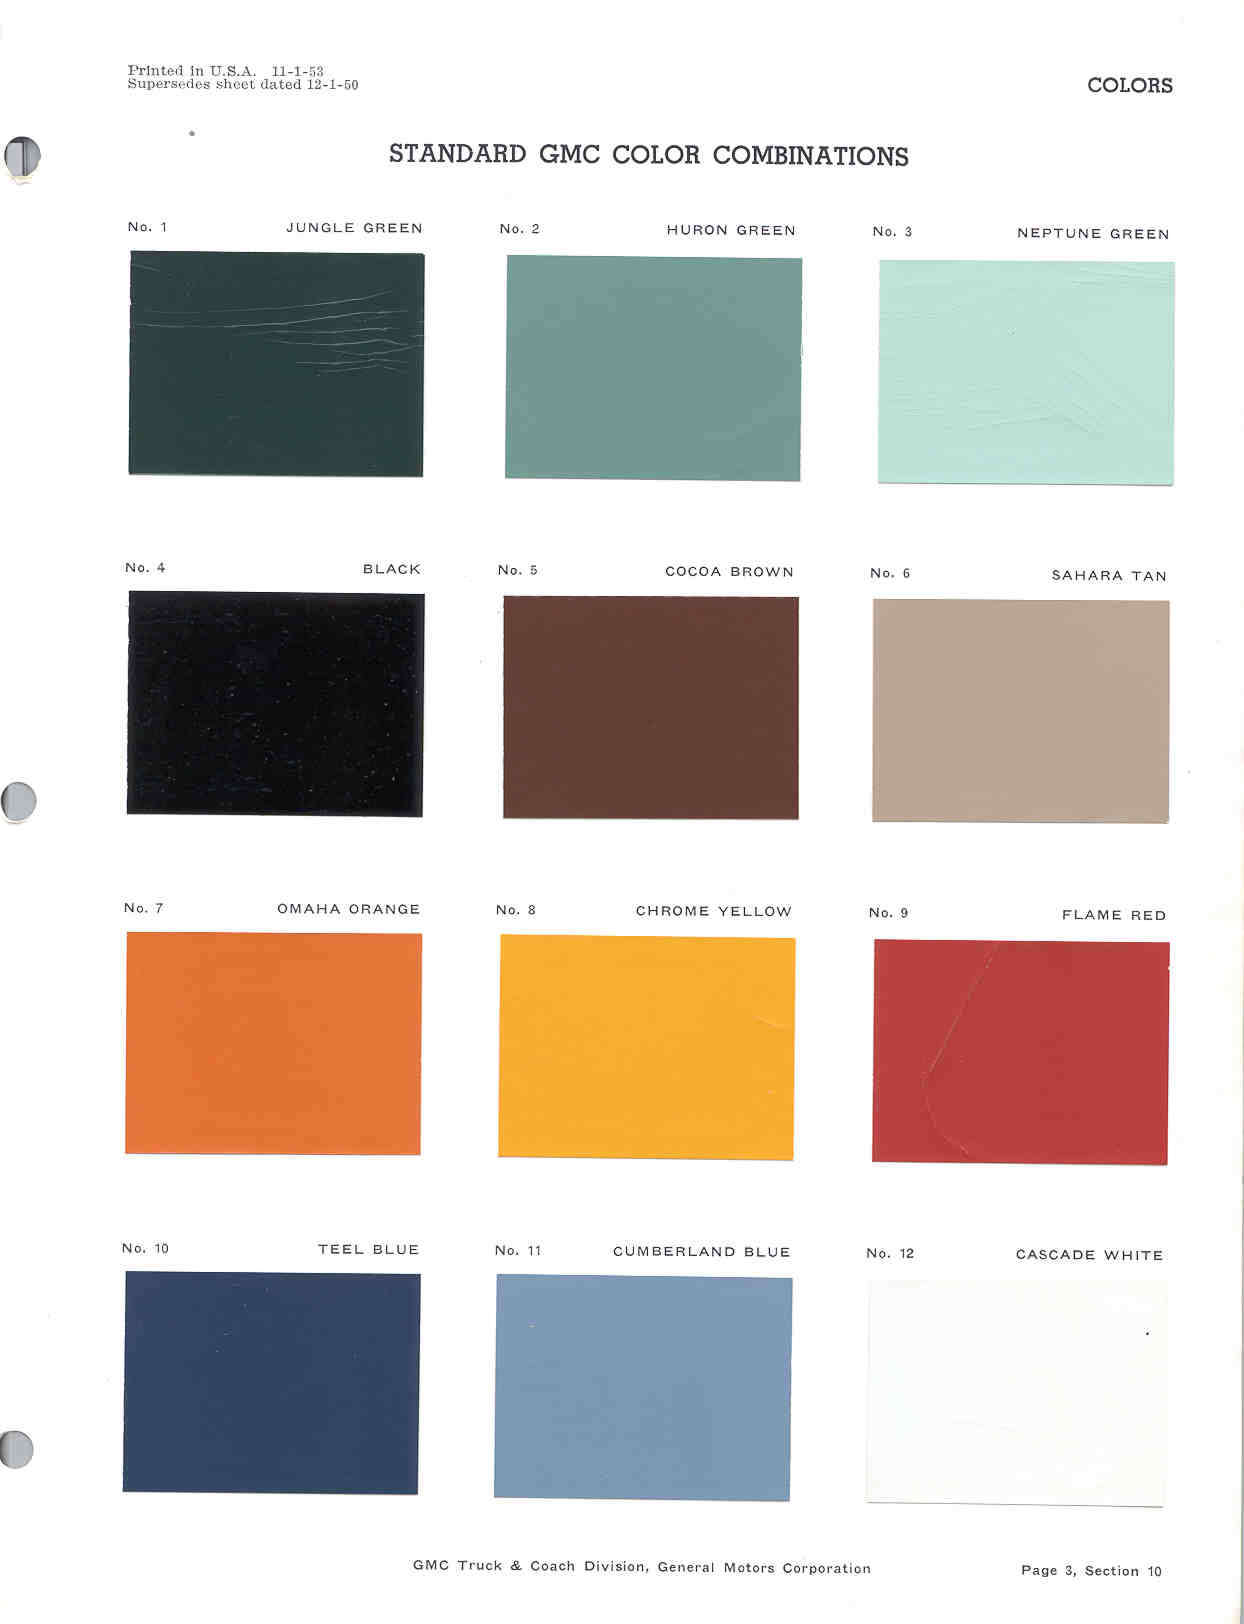 1955 Chevy Truck Color Chart